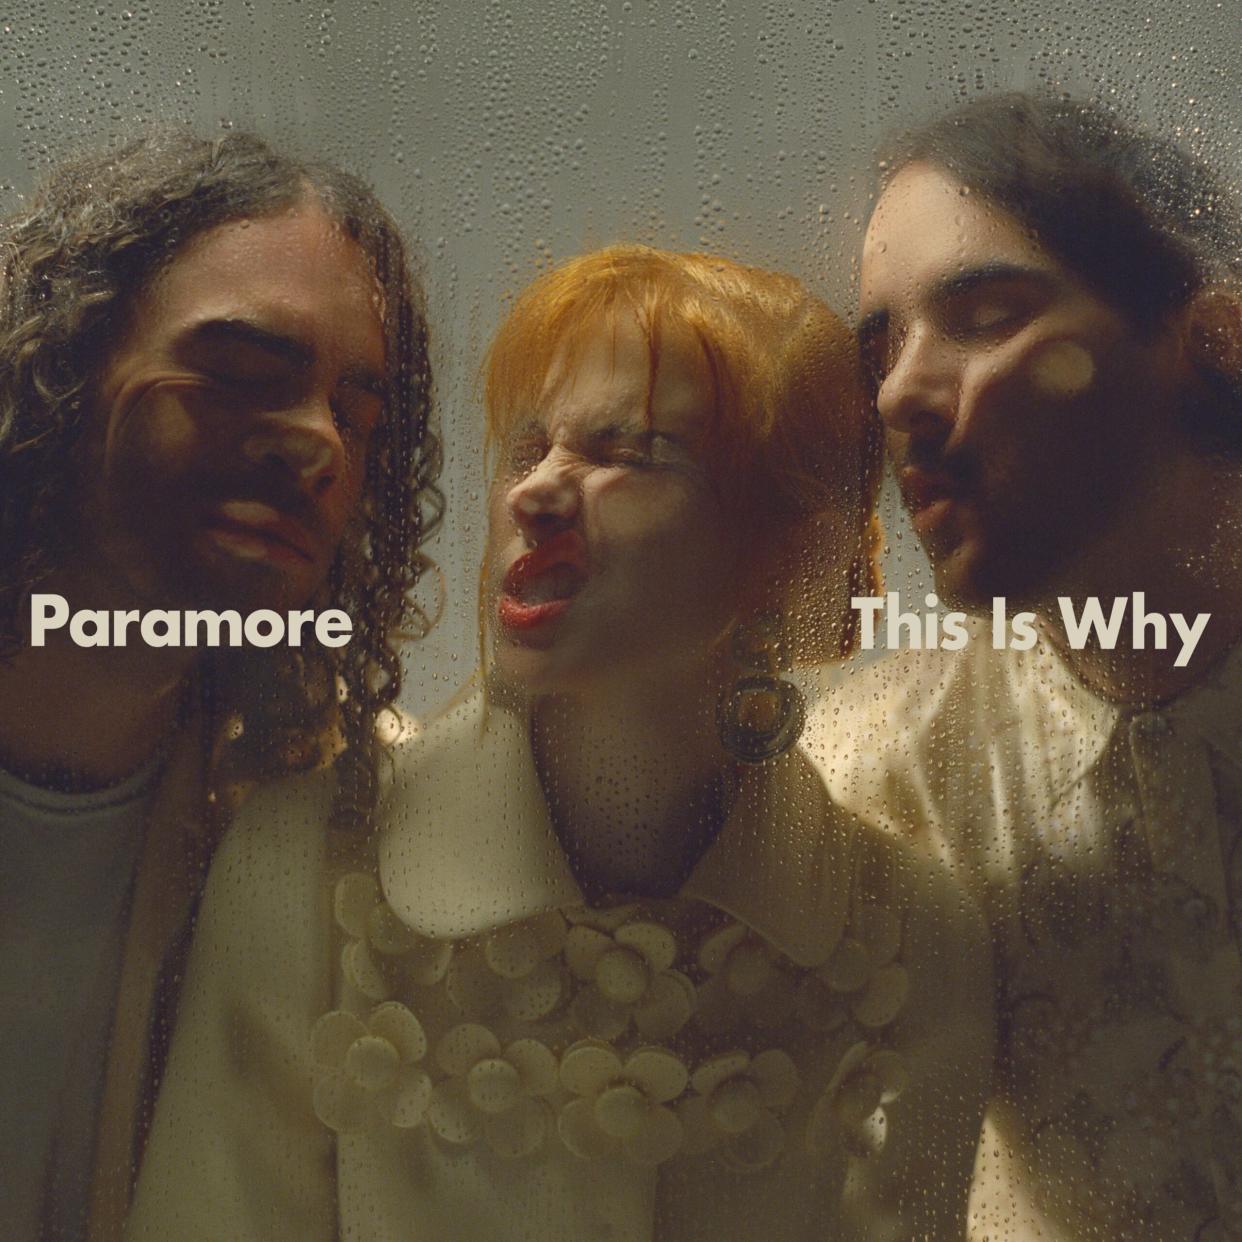 Paramore Urges Listeners to Turn Off 'The News' on New Single